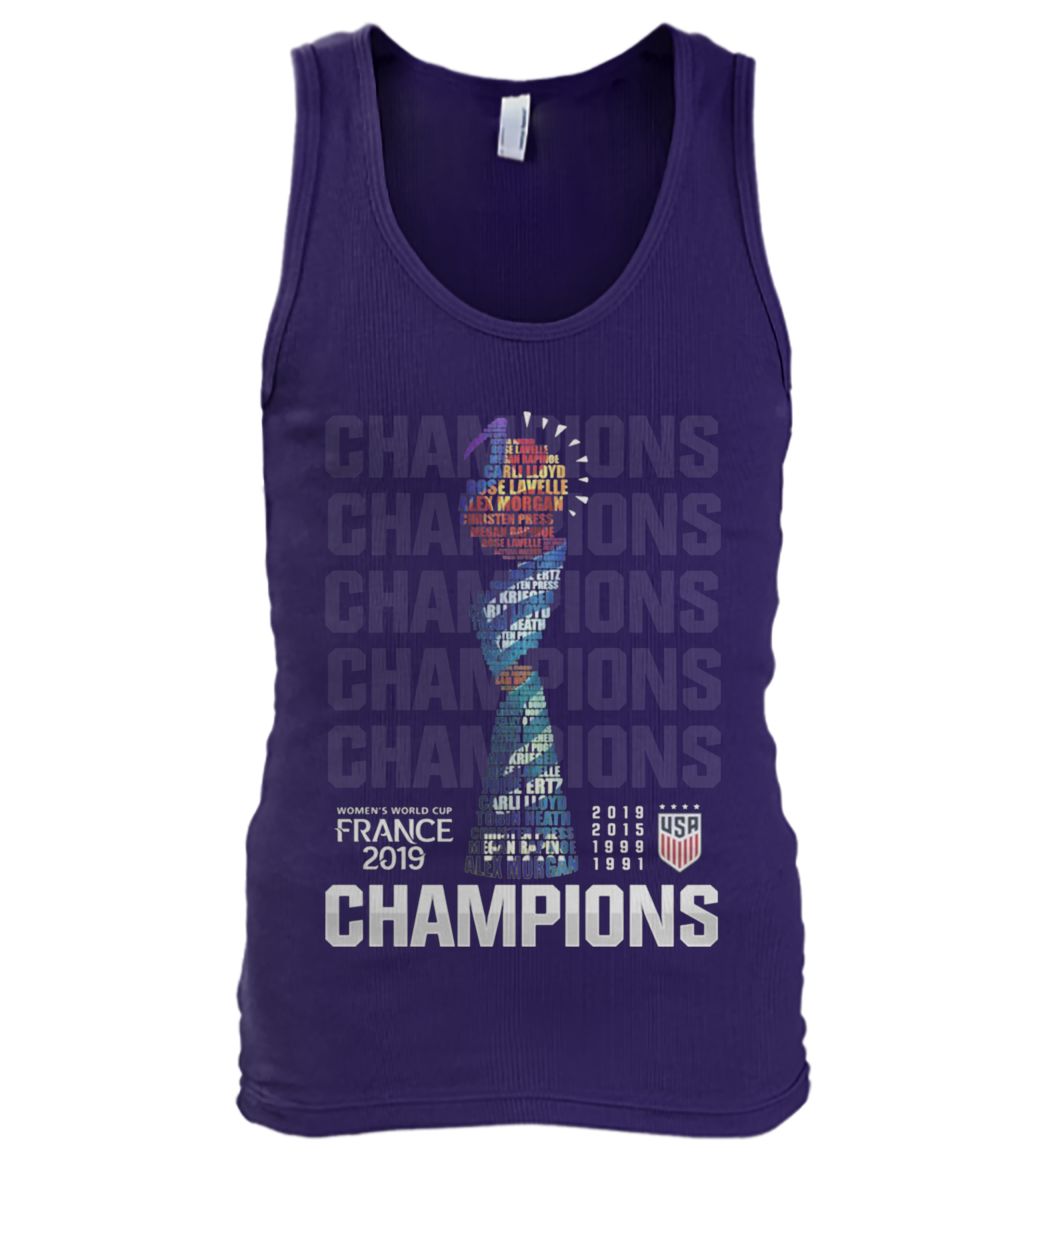 Champions USA women's world cup france 2019 men's tank top